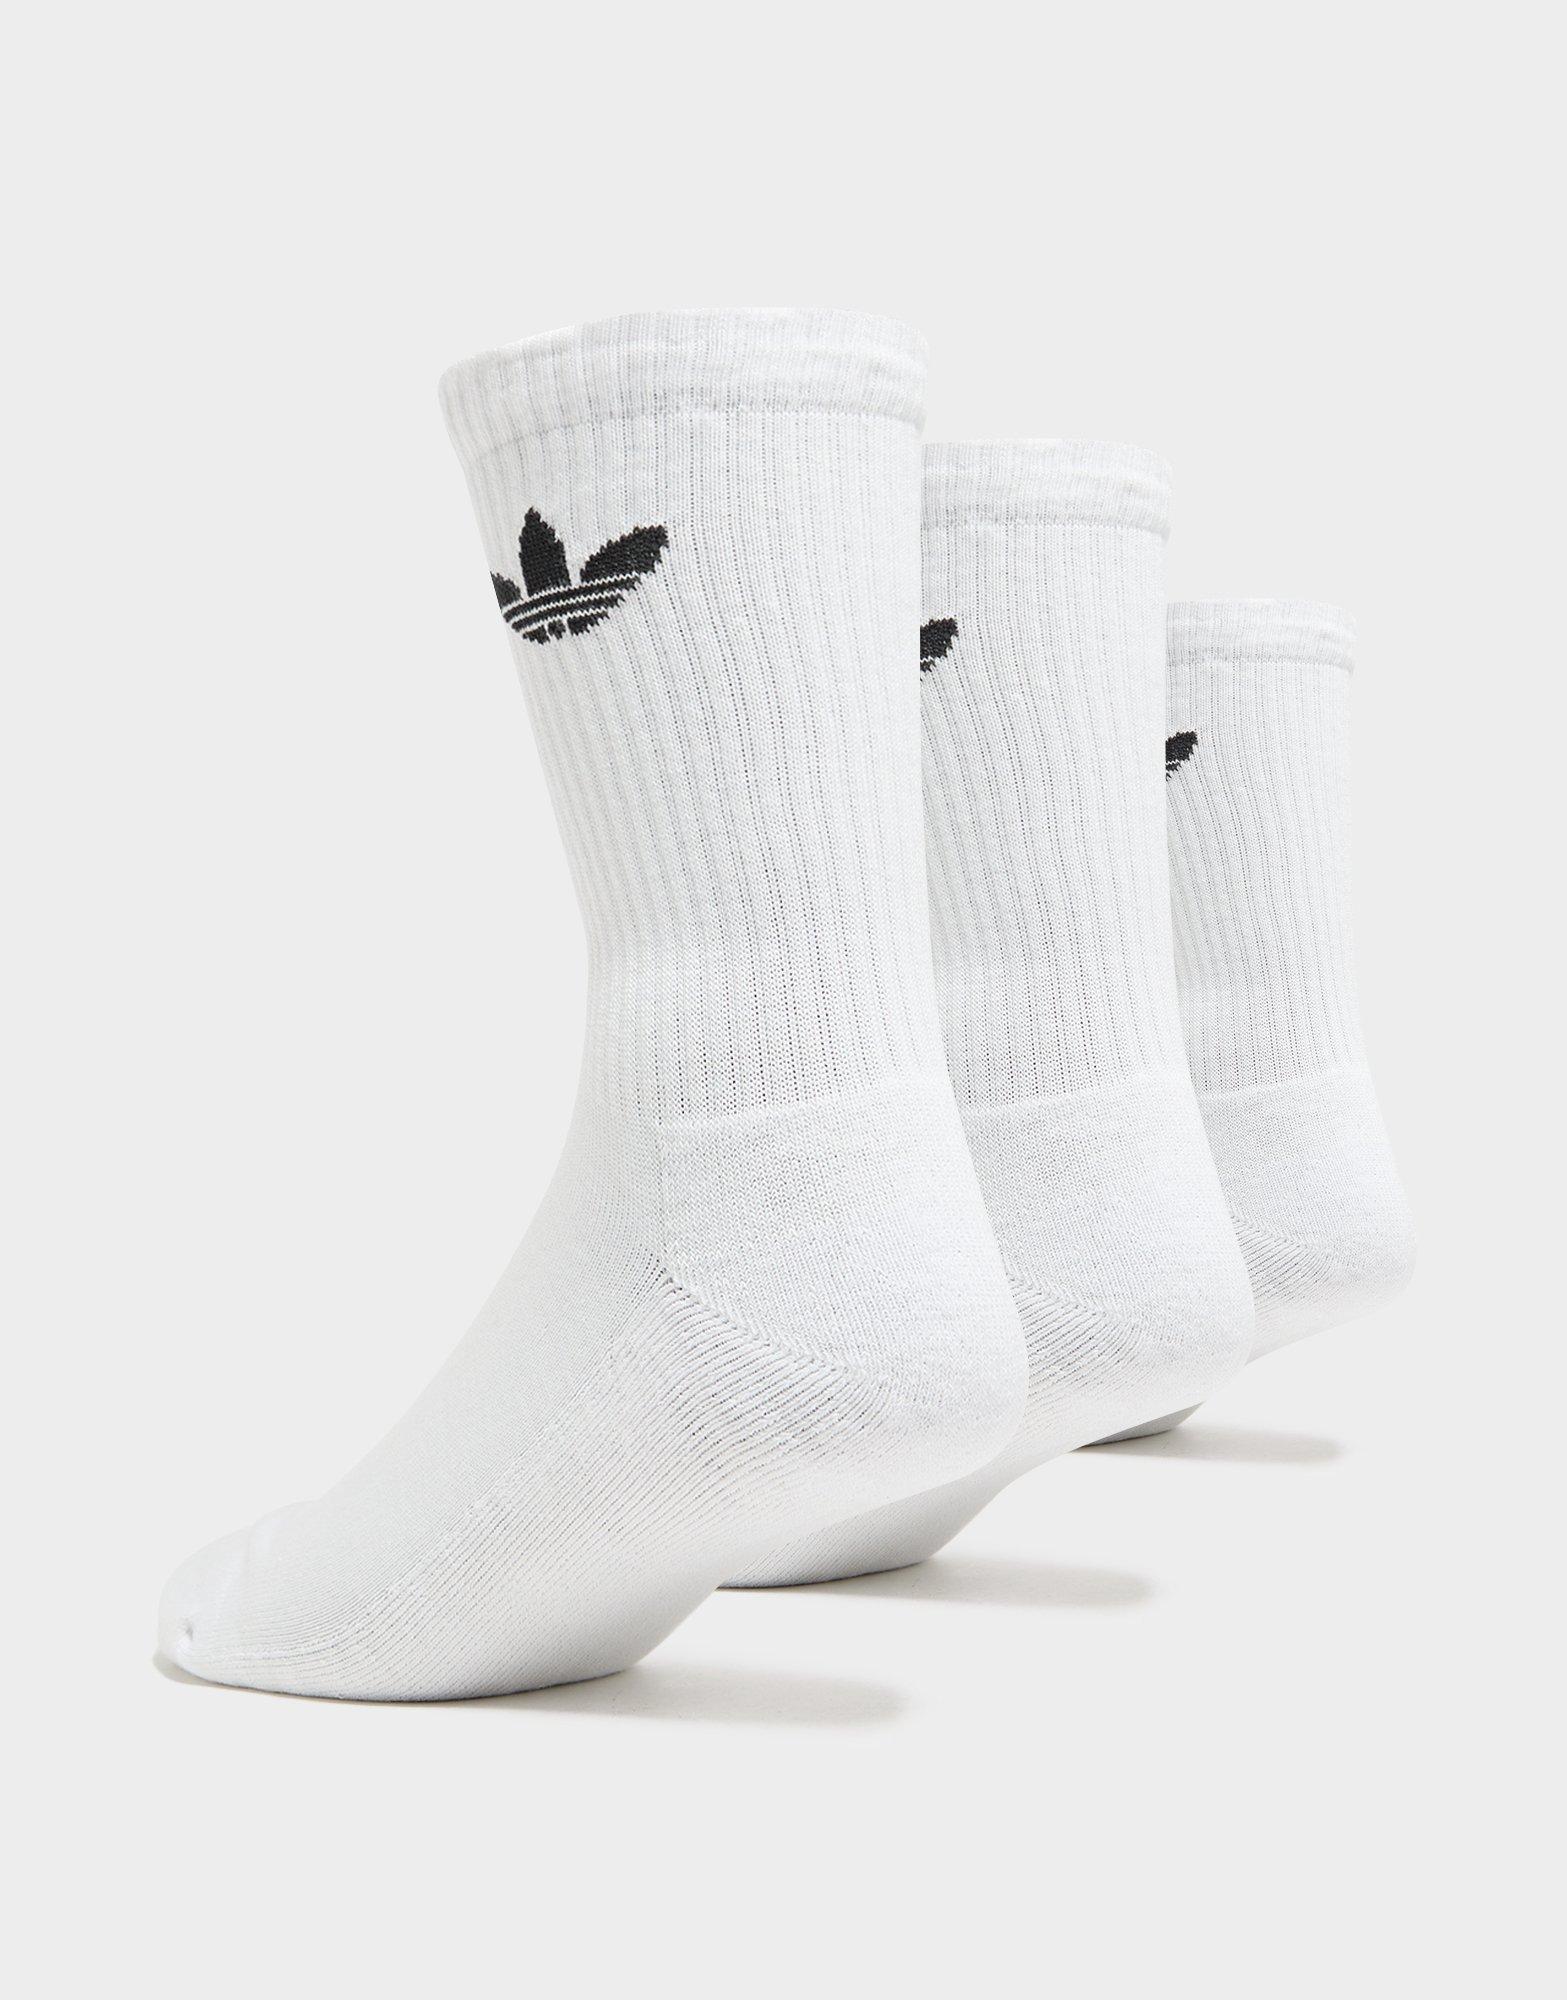 adidas Chaussettes Milano 16 (1 paire) Rouge- JD Sports France